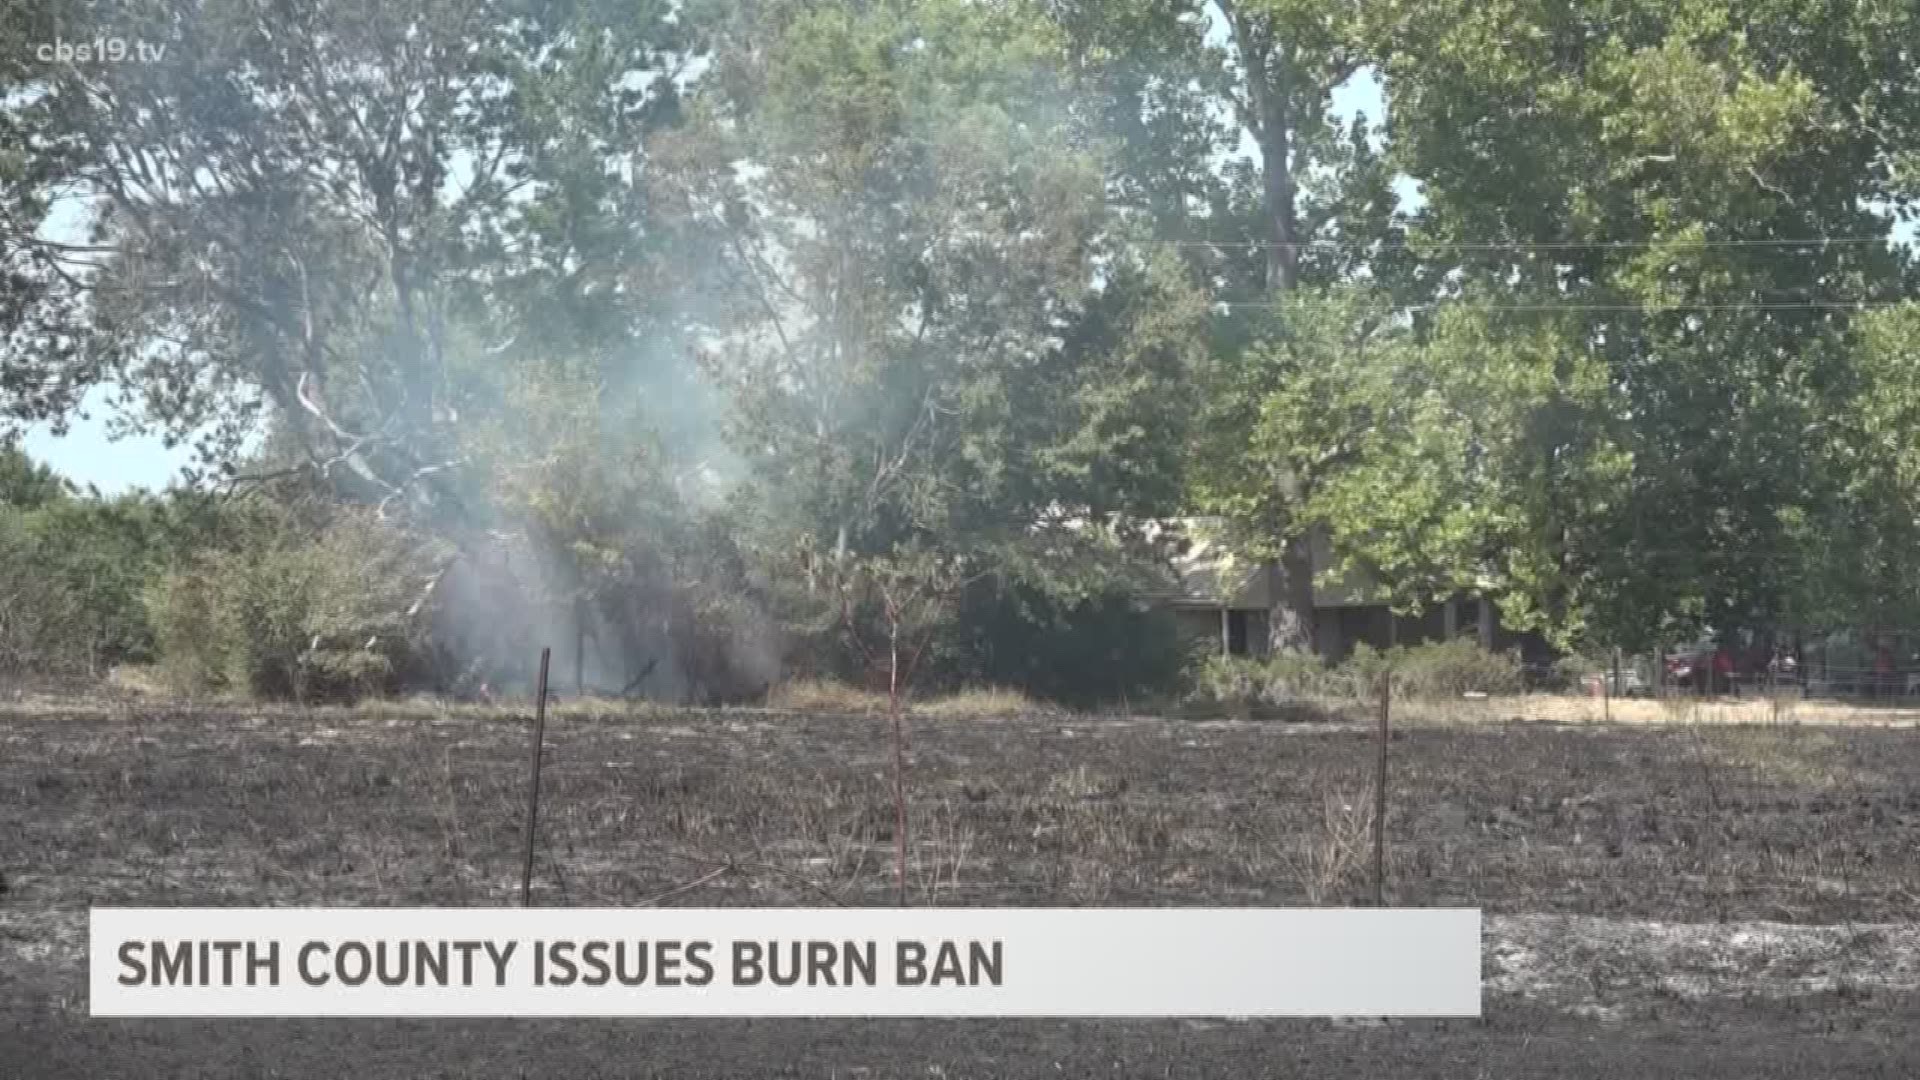 12 East Texas counties are now under a burn ban